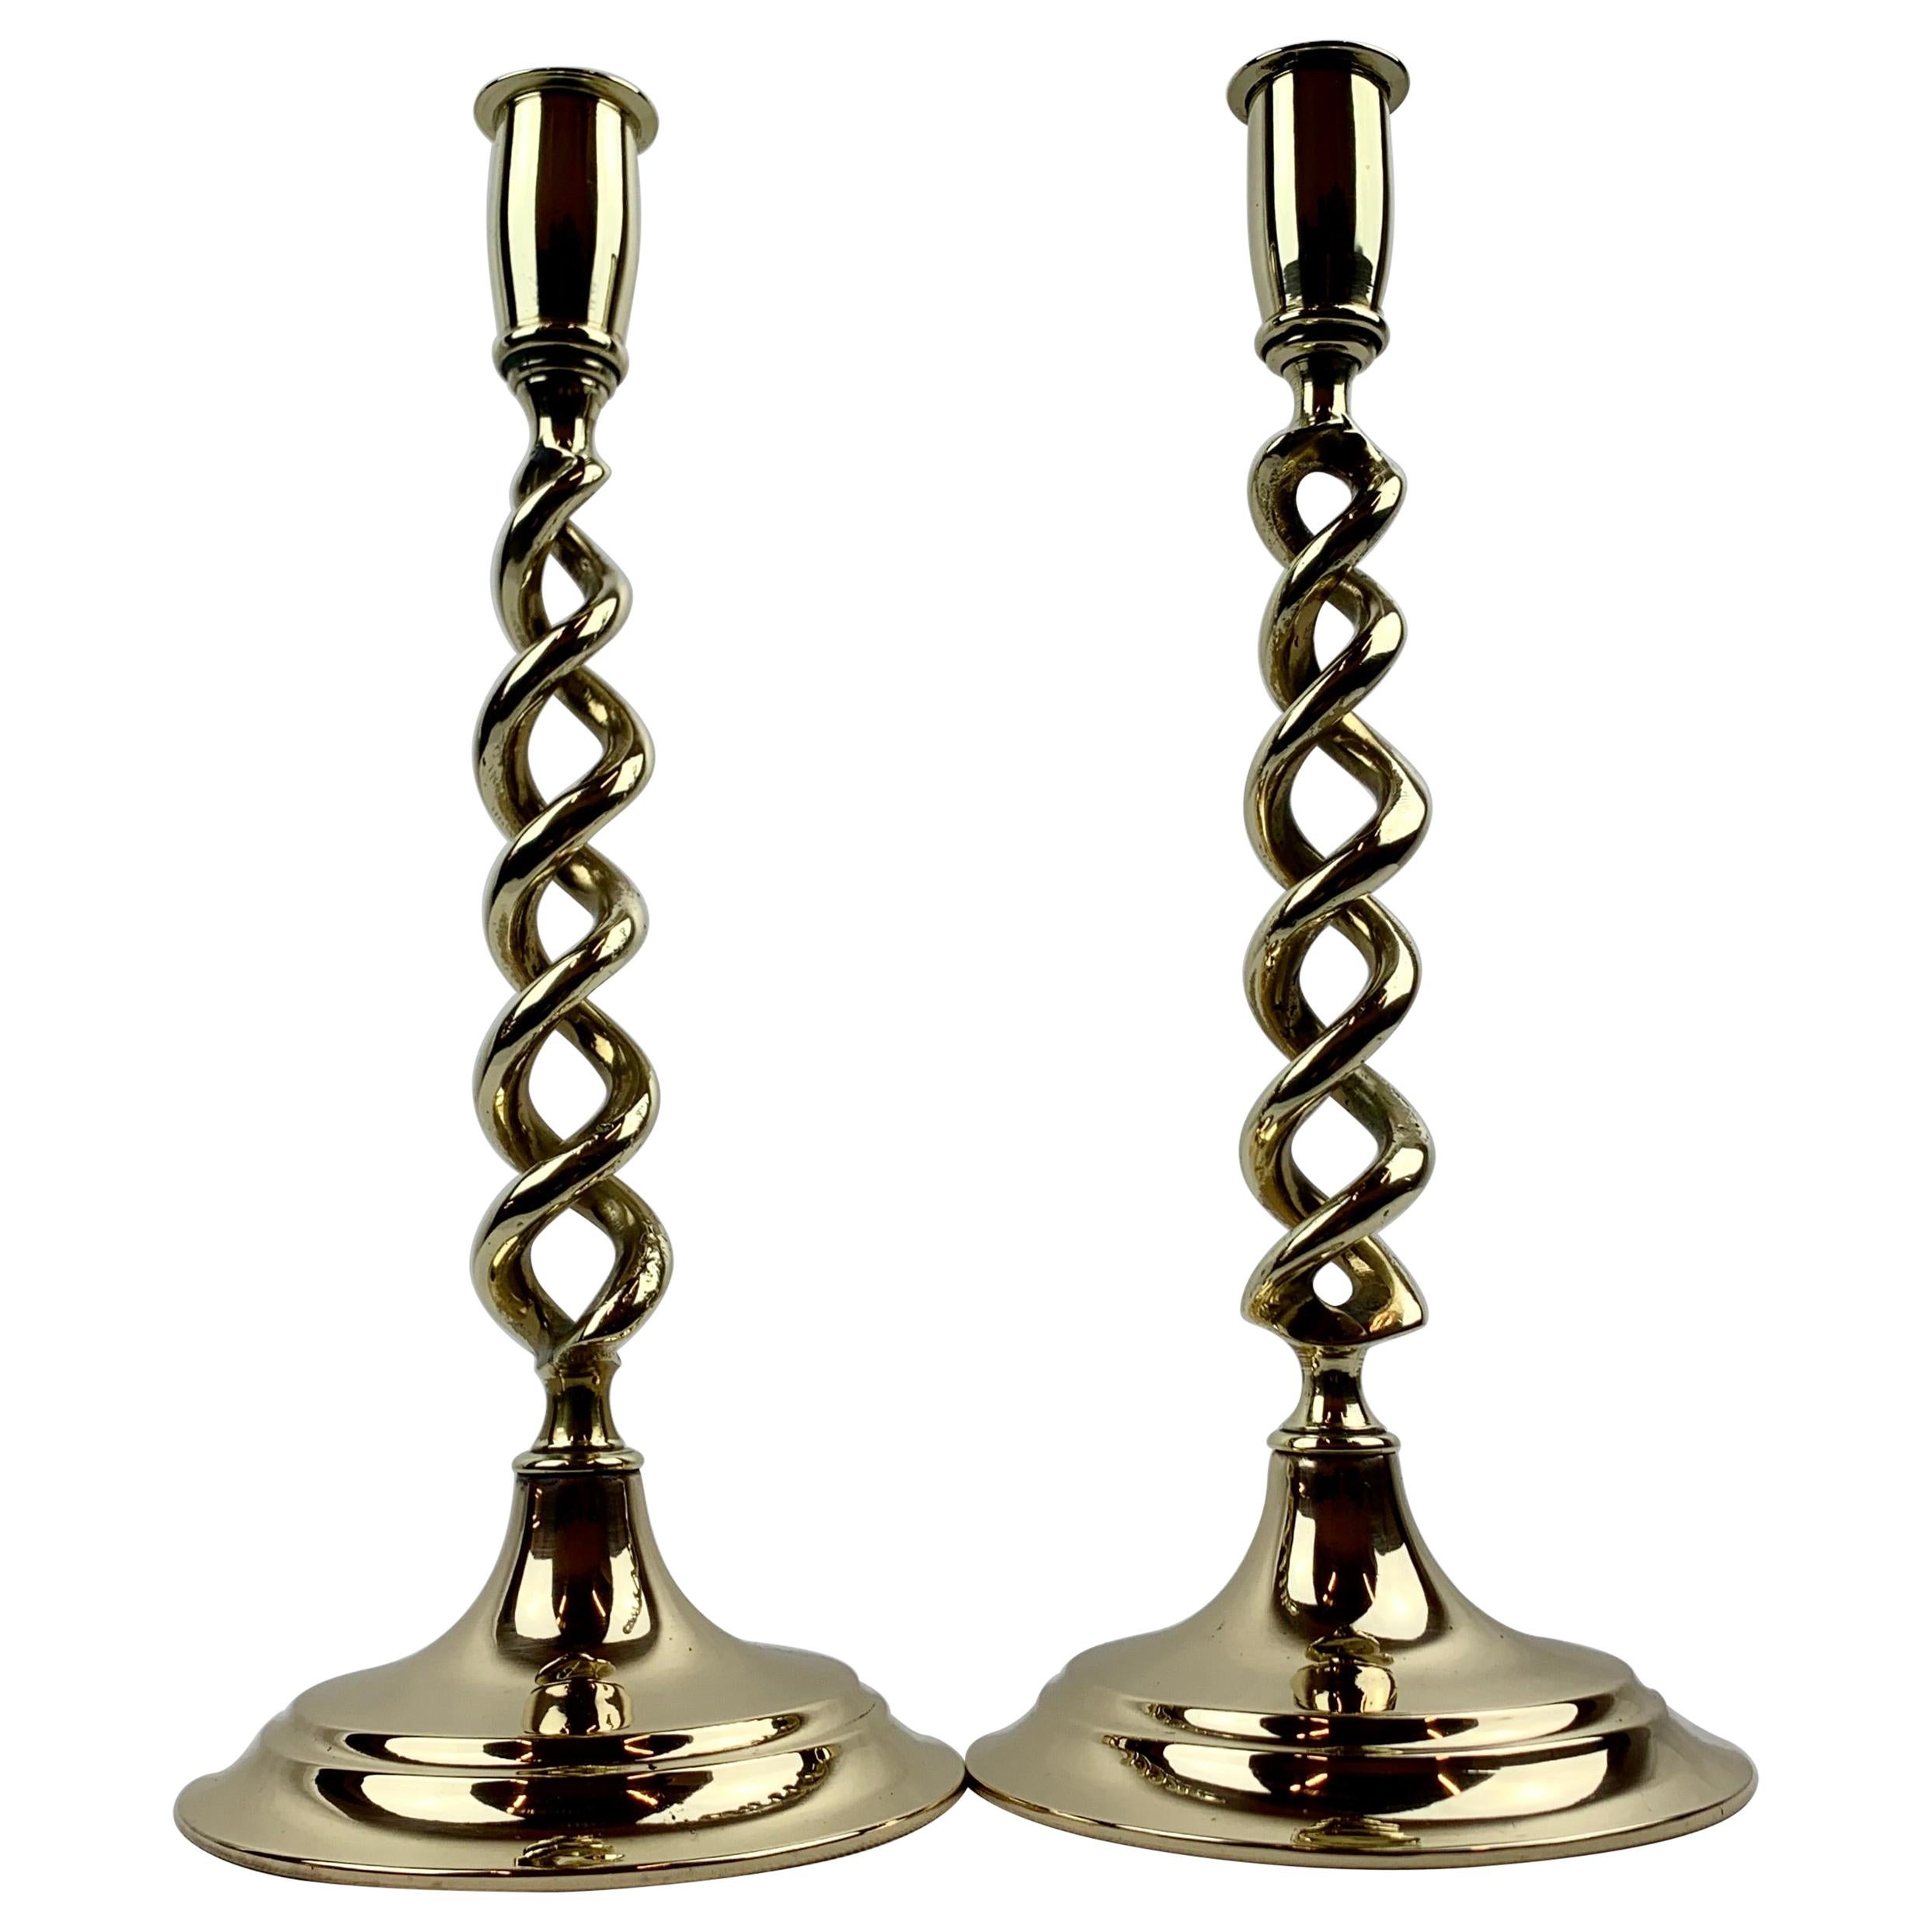 Solid Brass Open Barley Twist Candlesticks with Round Bases- 19th c. For Sale